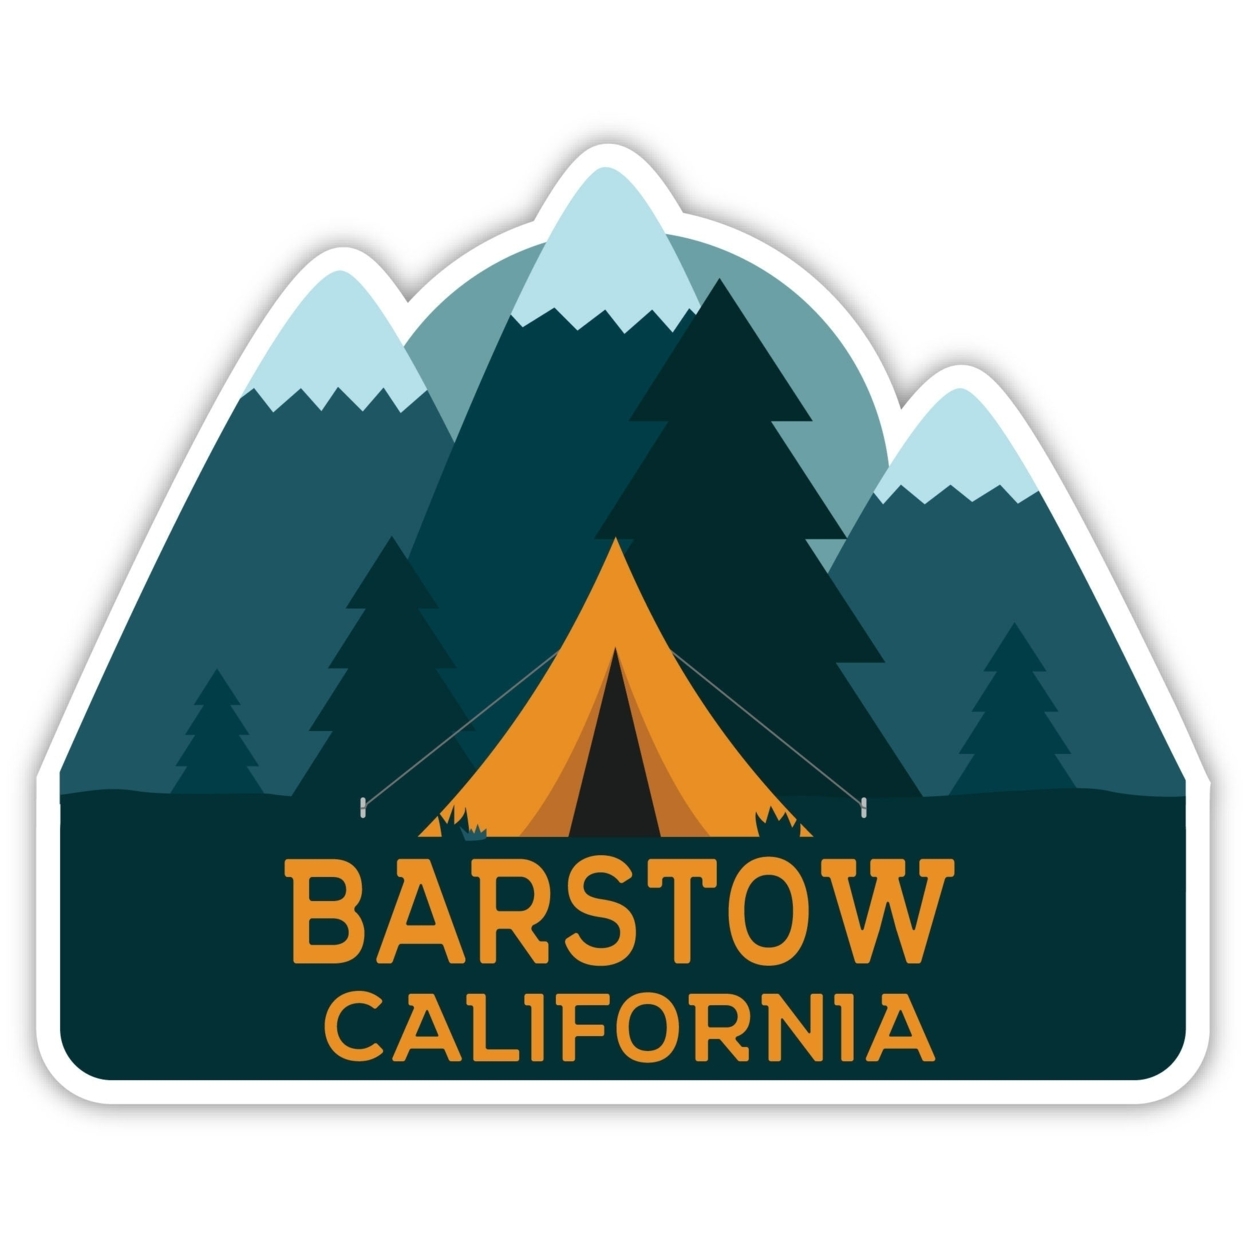 Barstow California Souvenir Decorative Stickers (Choose Theme And Size) - 4-Pack, 10-Inch, Adventures Awaits